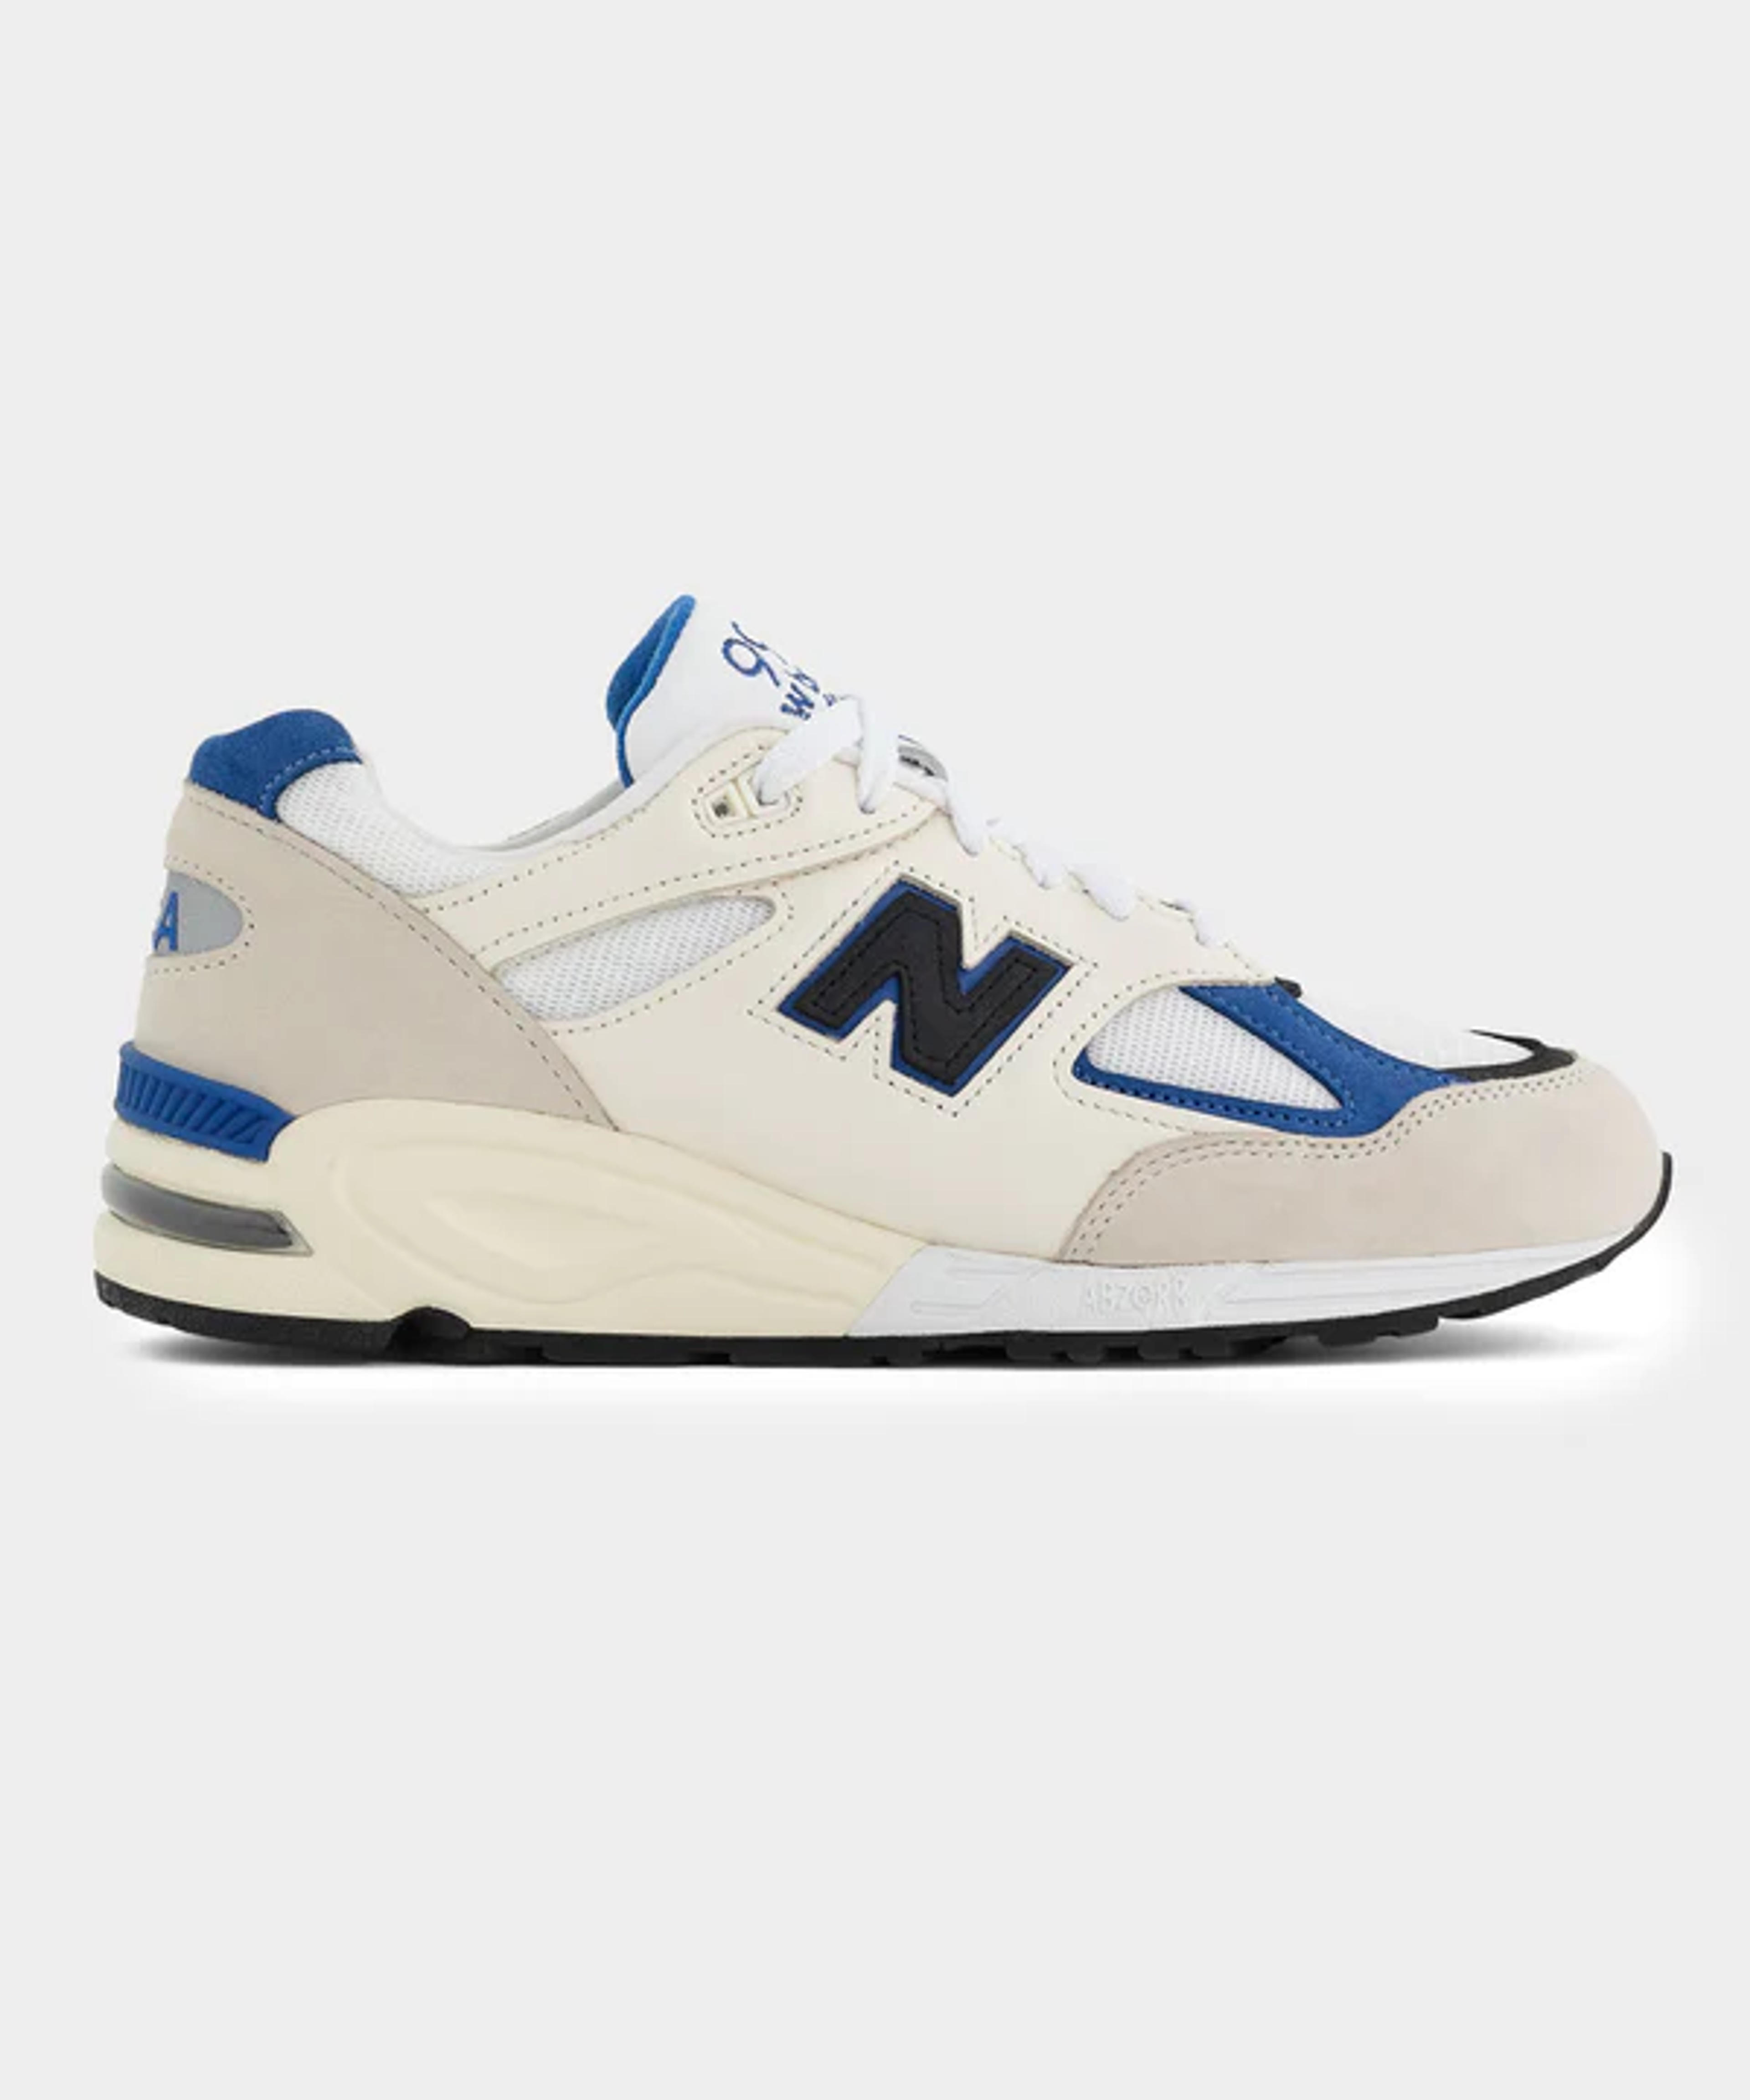 New Balance Made in the USA 990 in White / Blue